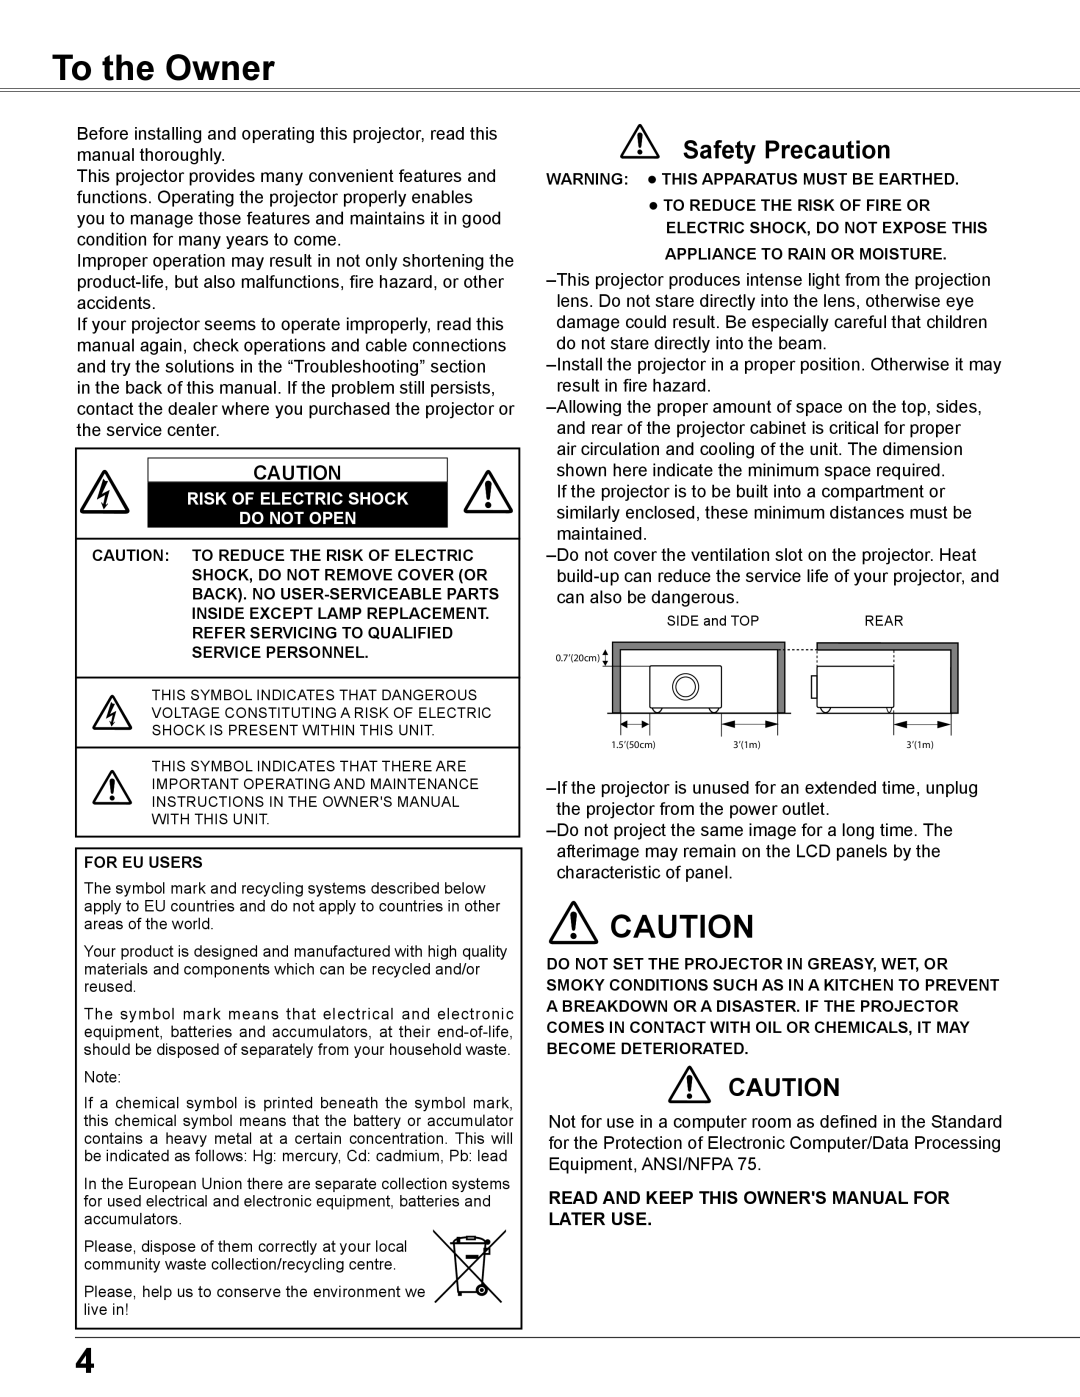 Sanyo PLC-XC56 owner manual To the Owner, Safety Precaution, Risk Of Electric Shock Do Not Open 